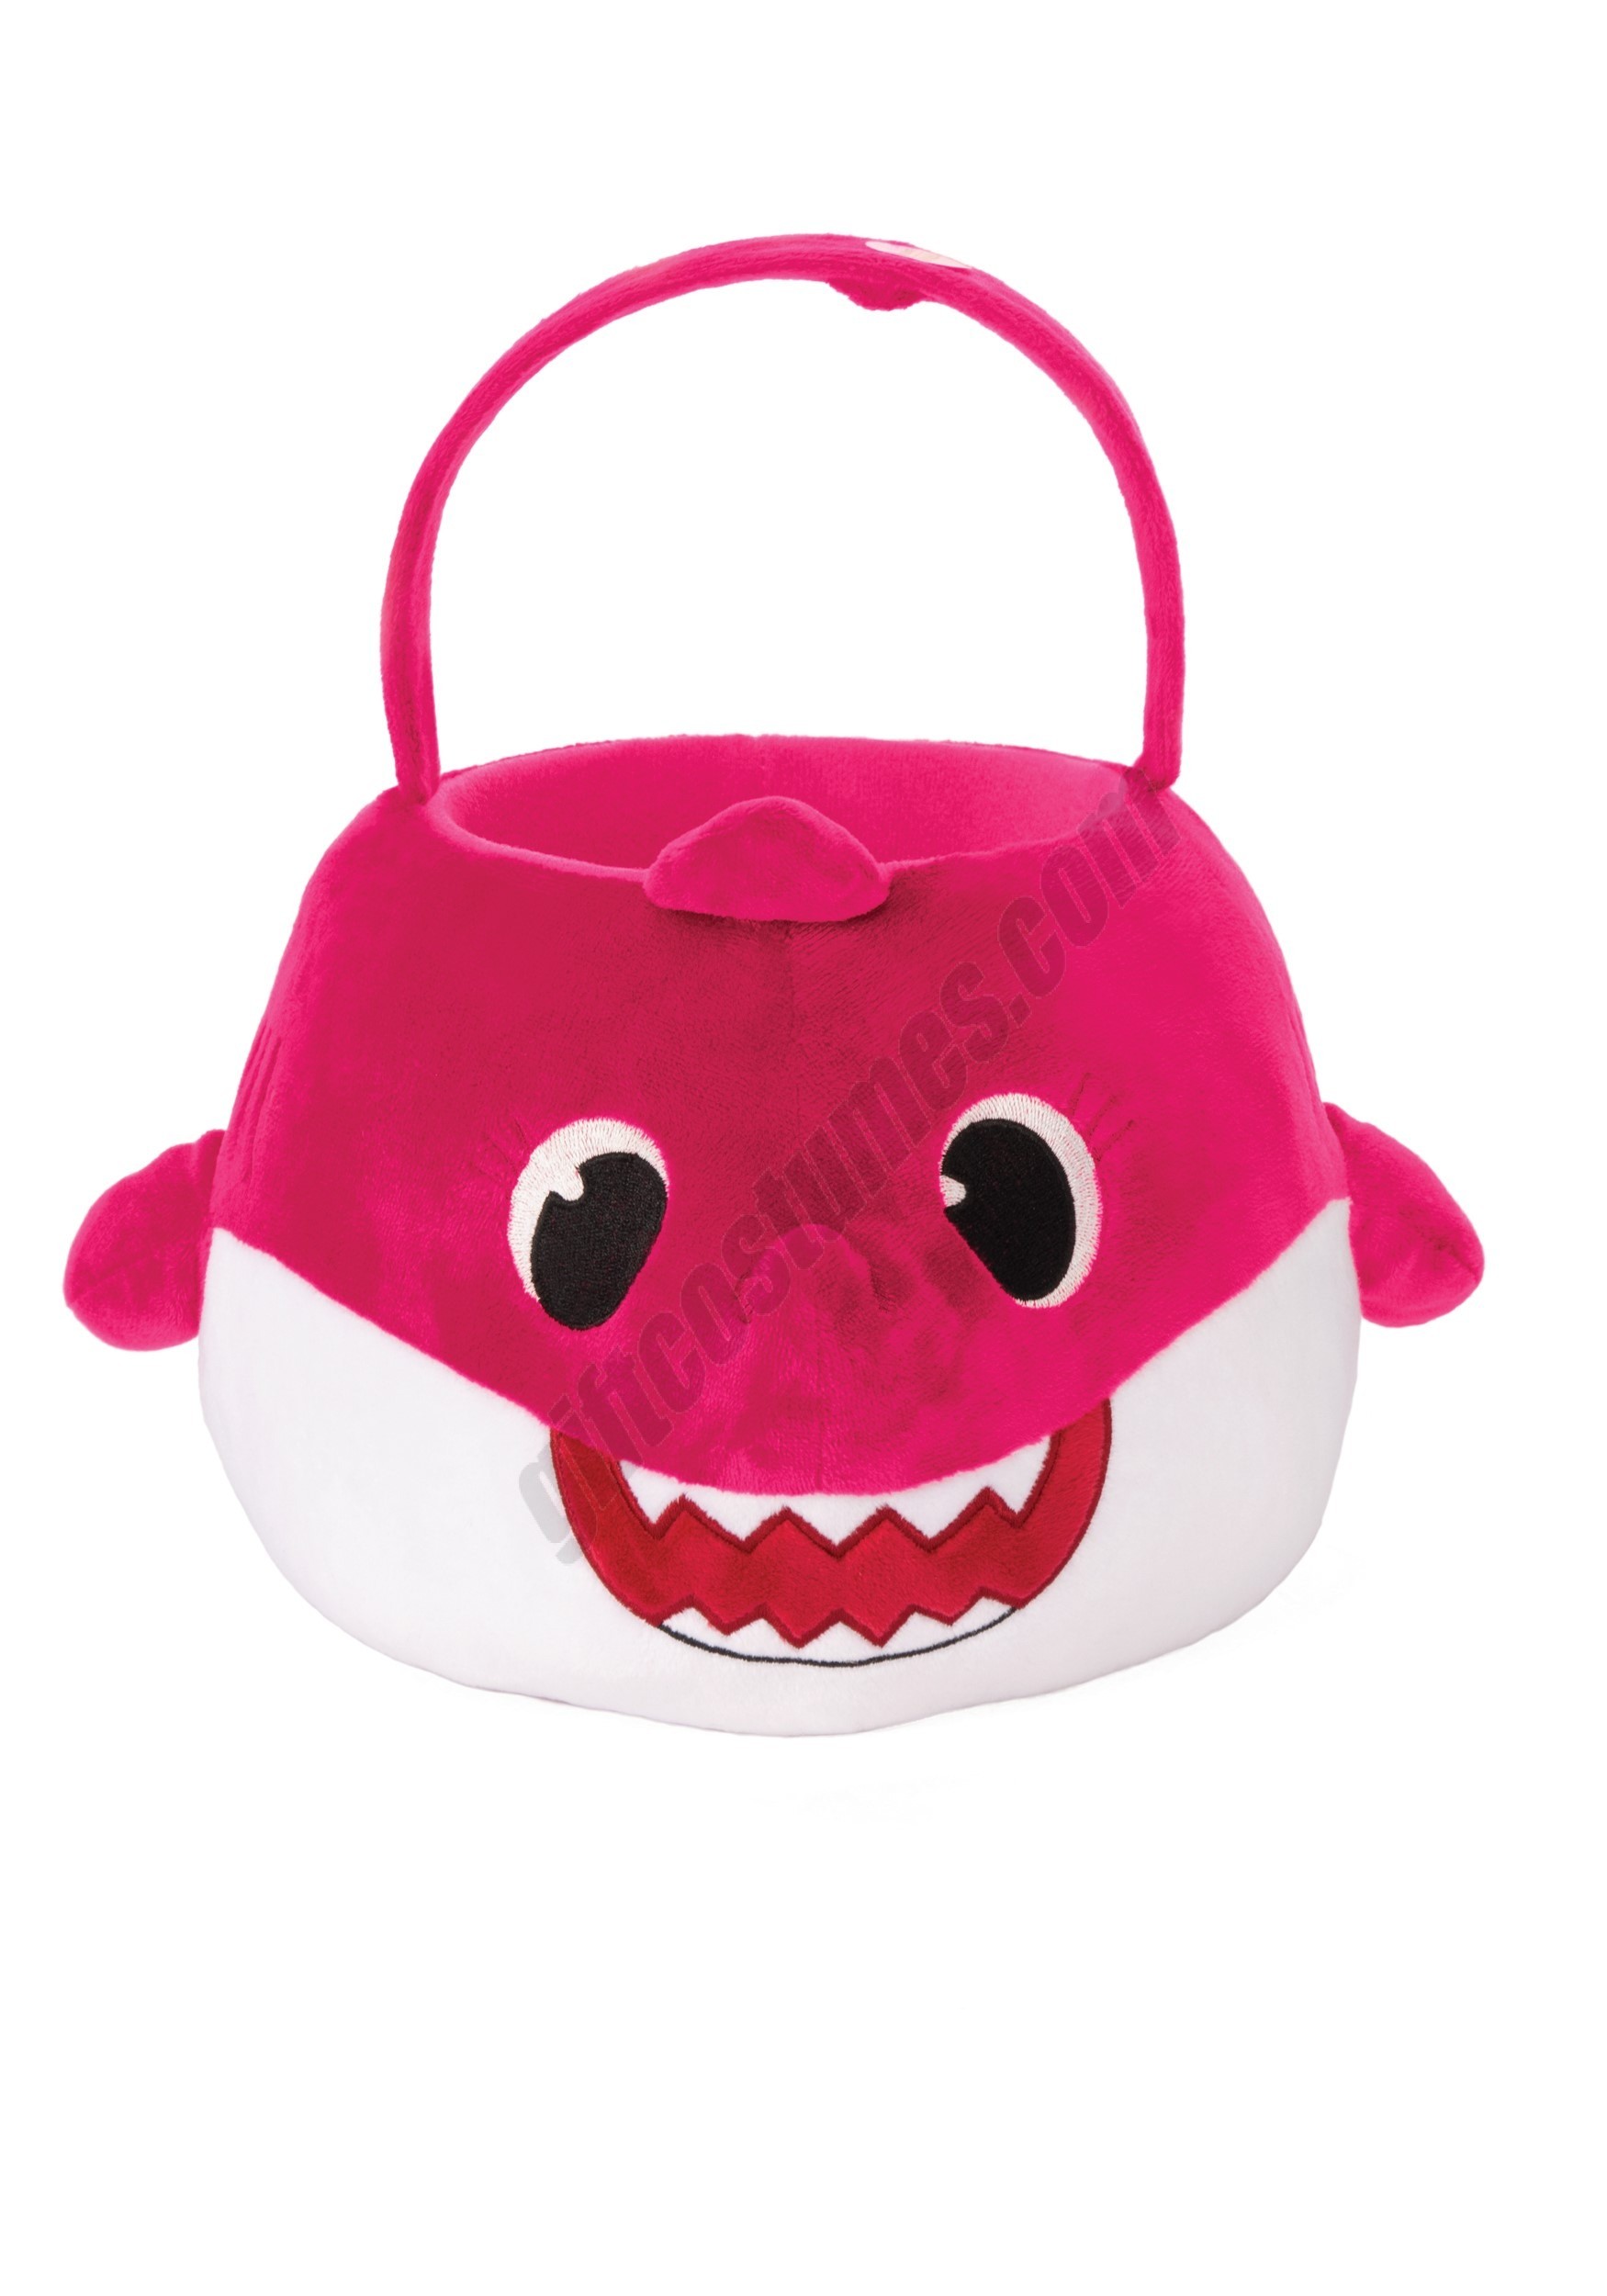 Mommyshark Treat Tote with Soundchip Promotions - Mommyshark Treat Tote with Soundchip Promotions